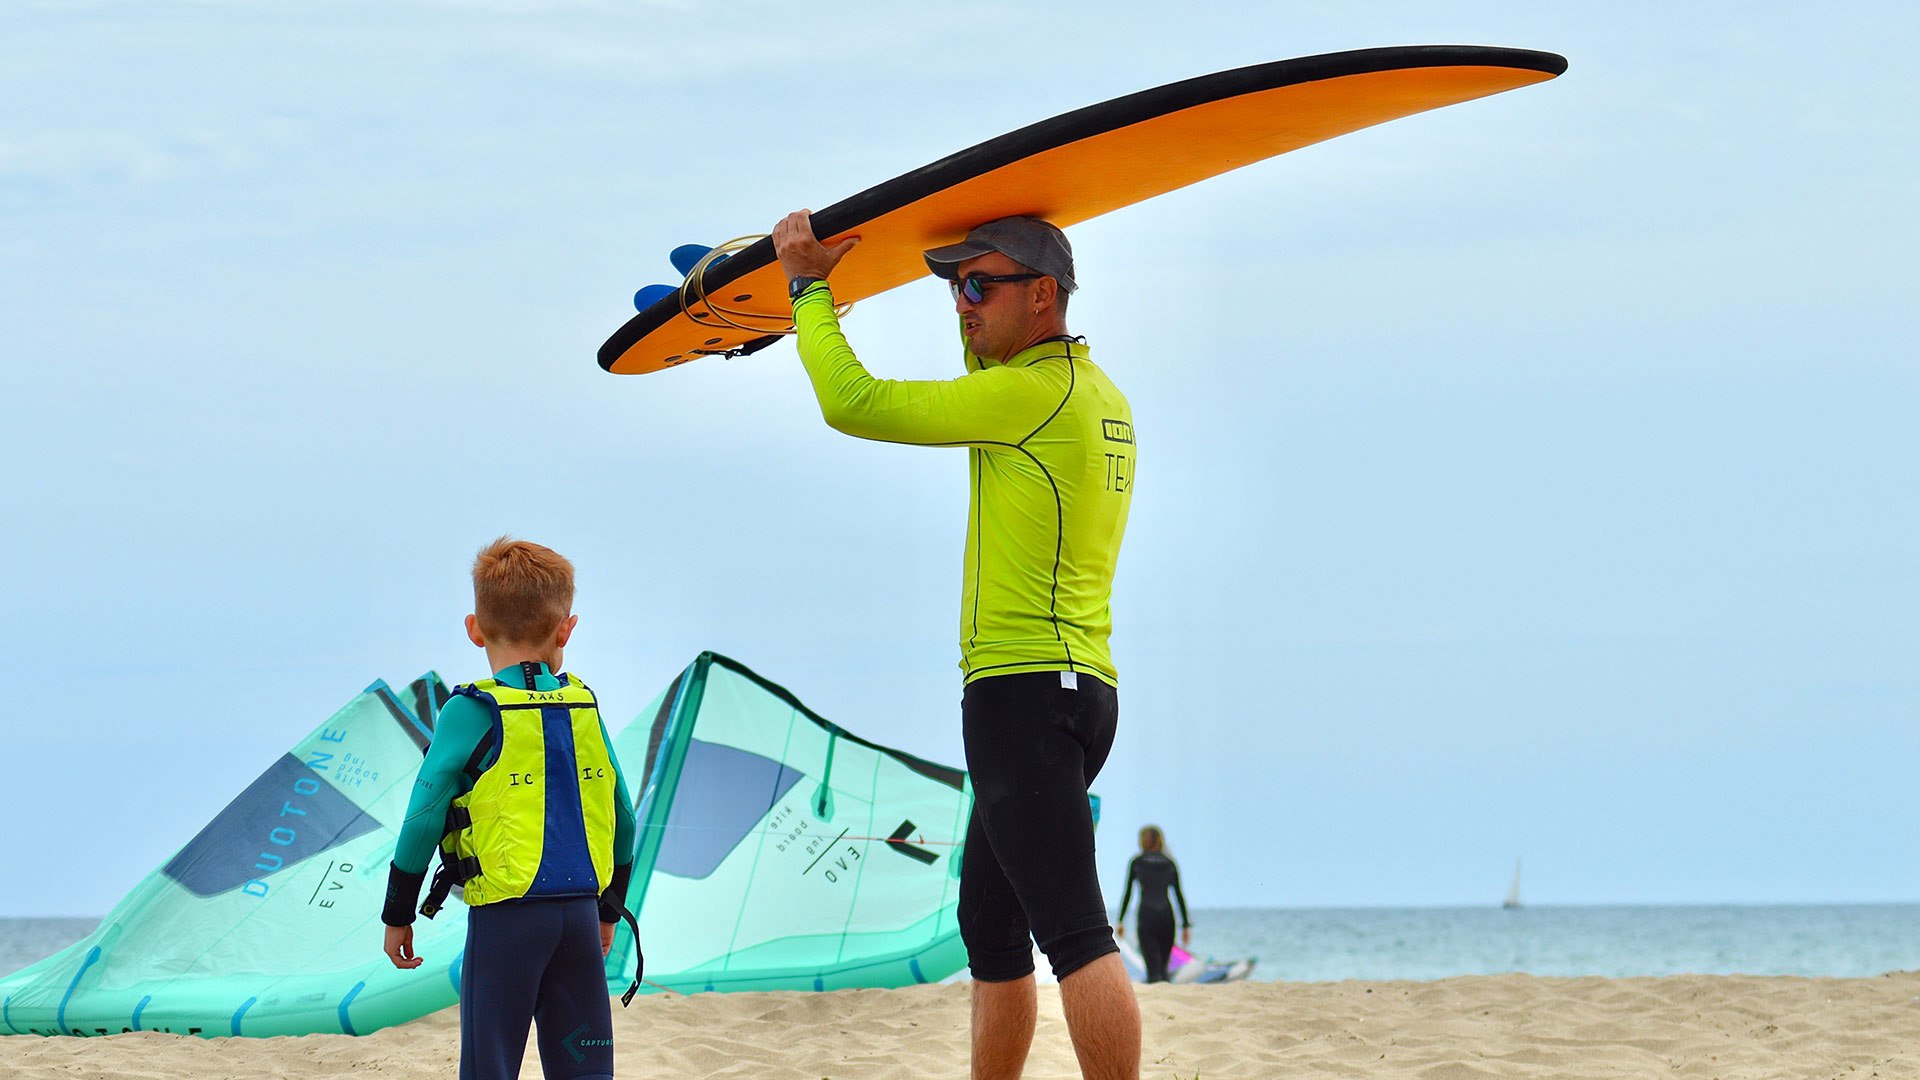 A surf instructor holds a beginner's surfboard above his head and is accompanied by a small boy for his first lesson in the water.